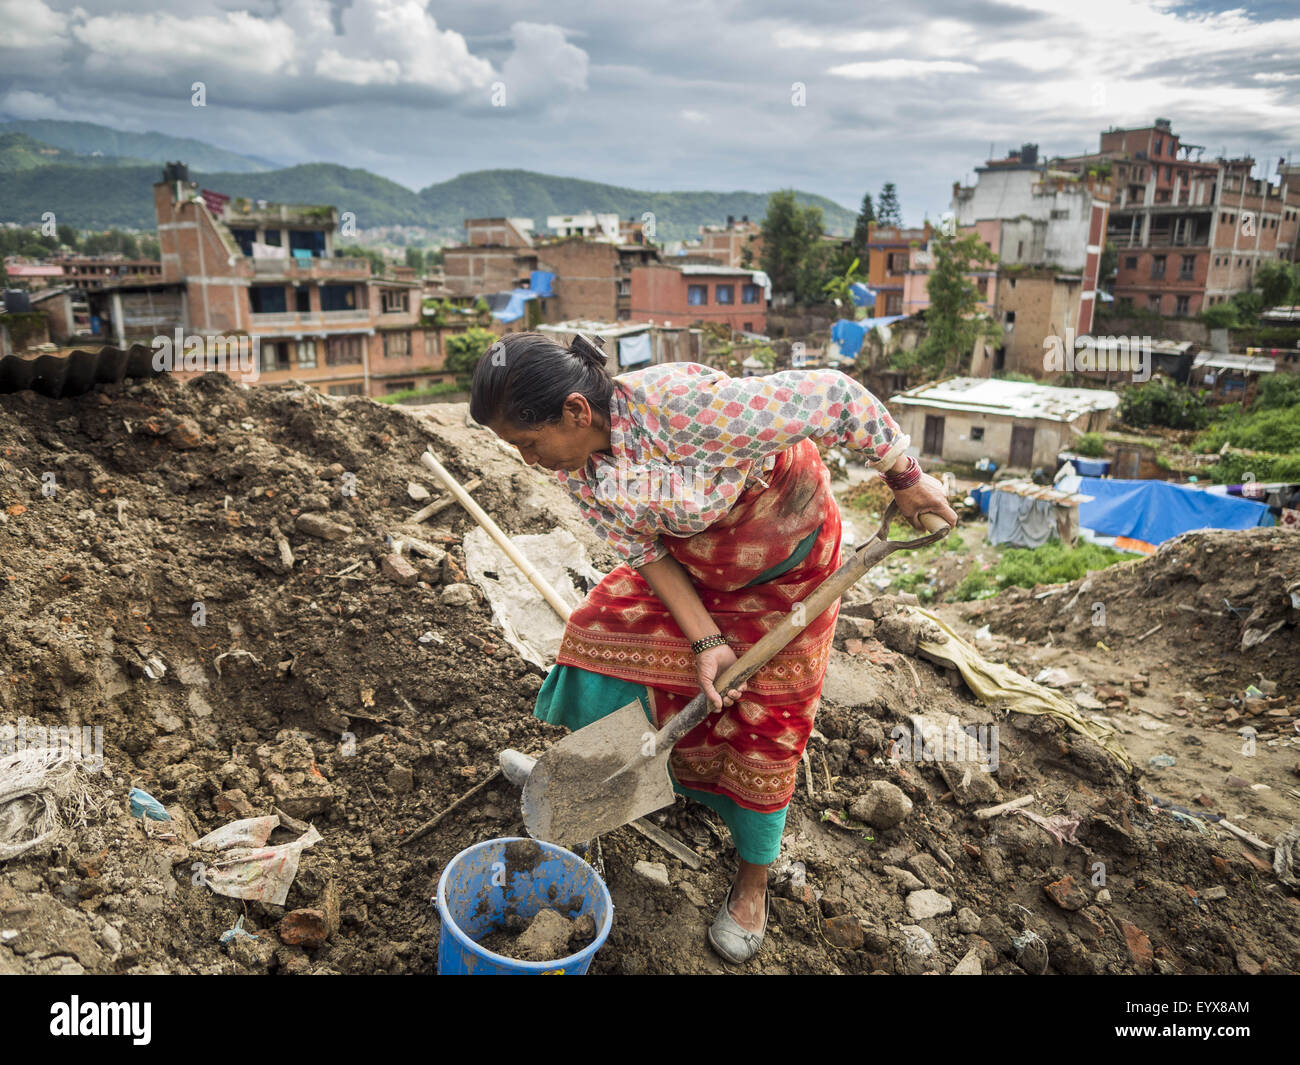 Bhaktapur, Central Region, Nepal. 2nd Aug, 2015. A woman digs up dirt for her temporary shelter in a small Internal Displaced Person (IDP) camp in Bhaktapur. Bhaktapur was badly damaged in the earthquake the hit Nepal in April 2015. The Nepal Earthquake on April 25, 2015, (also known as the Gorkha earthquake) killed more than 9,000 people and injured more than 23,000. It had a magnitude of 7.8. © Jack Kurtz/ZUMA Wire/Alamy Live News Stock Photo